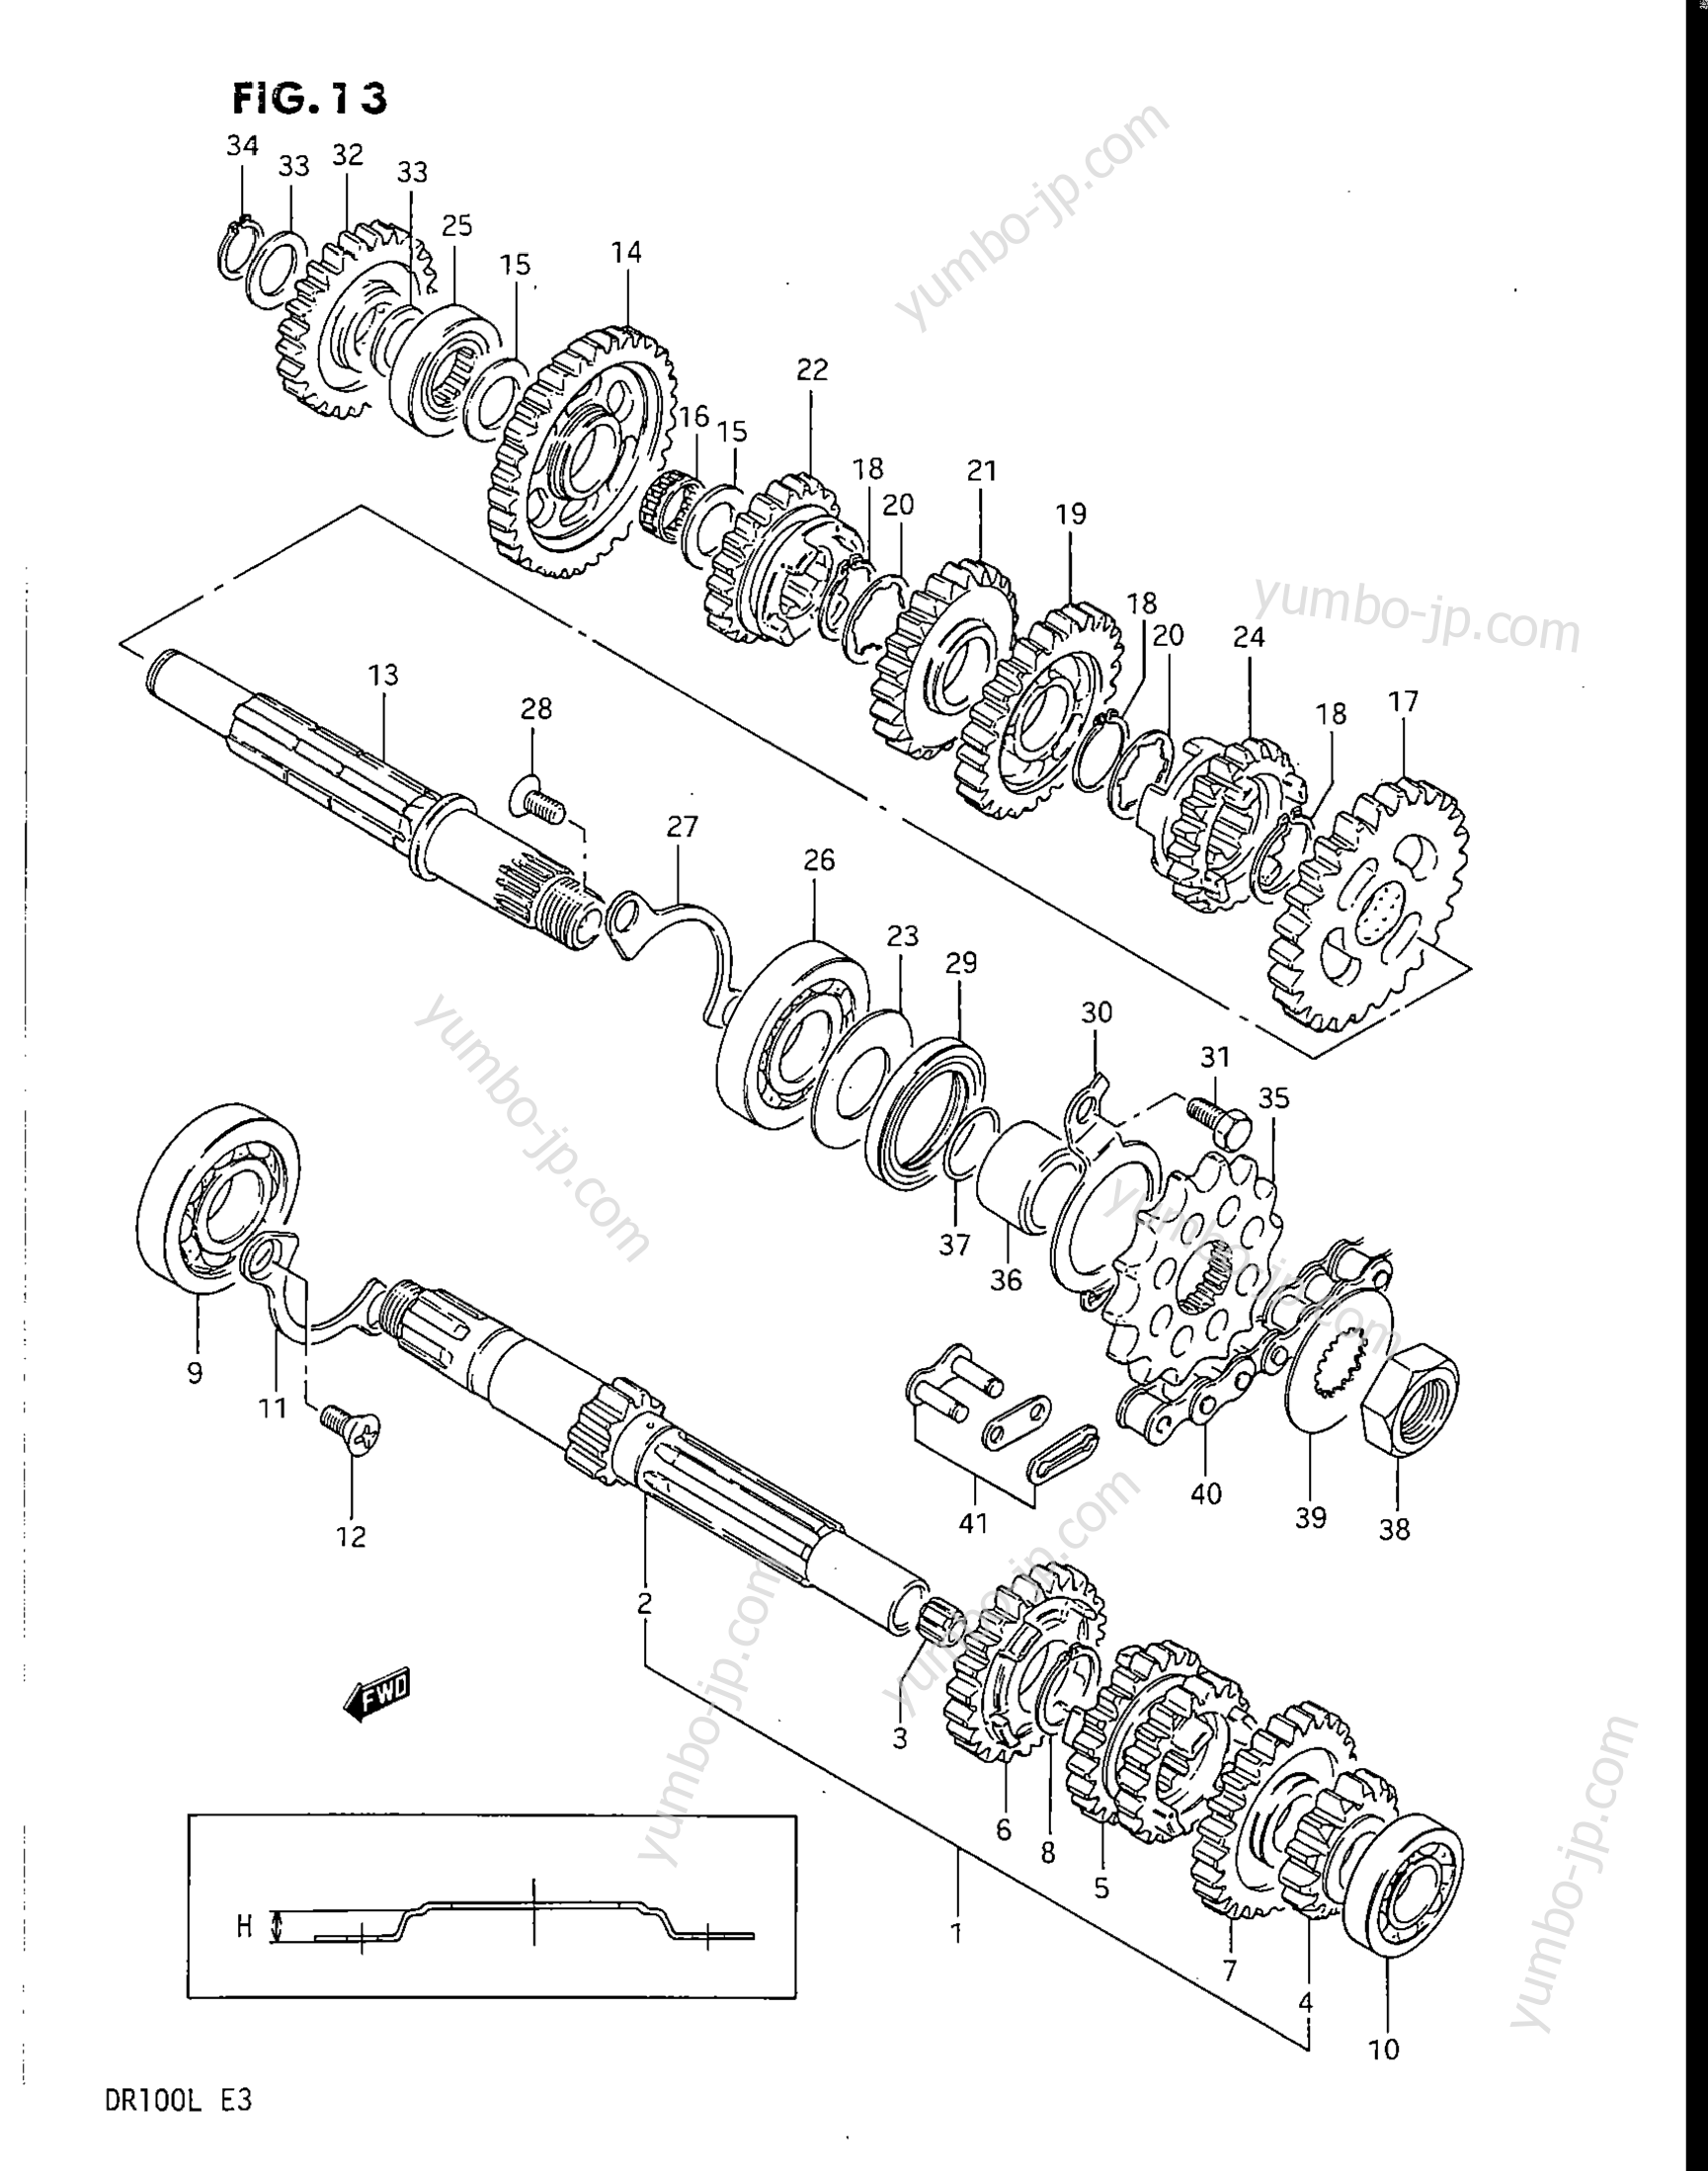 TRANSMISSION for motorcycles SUZUKI DR100 1986 year